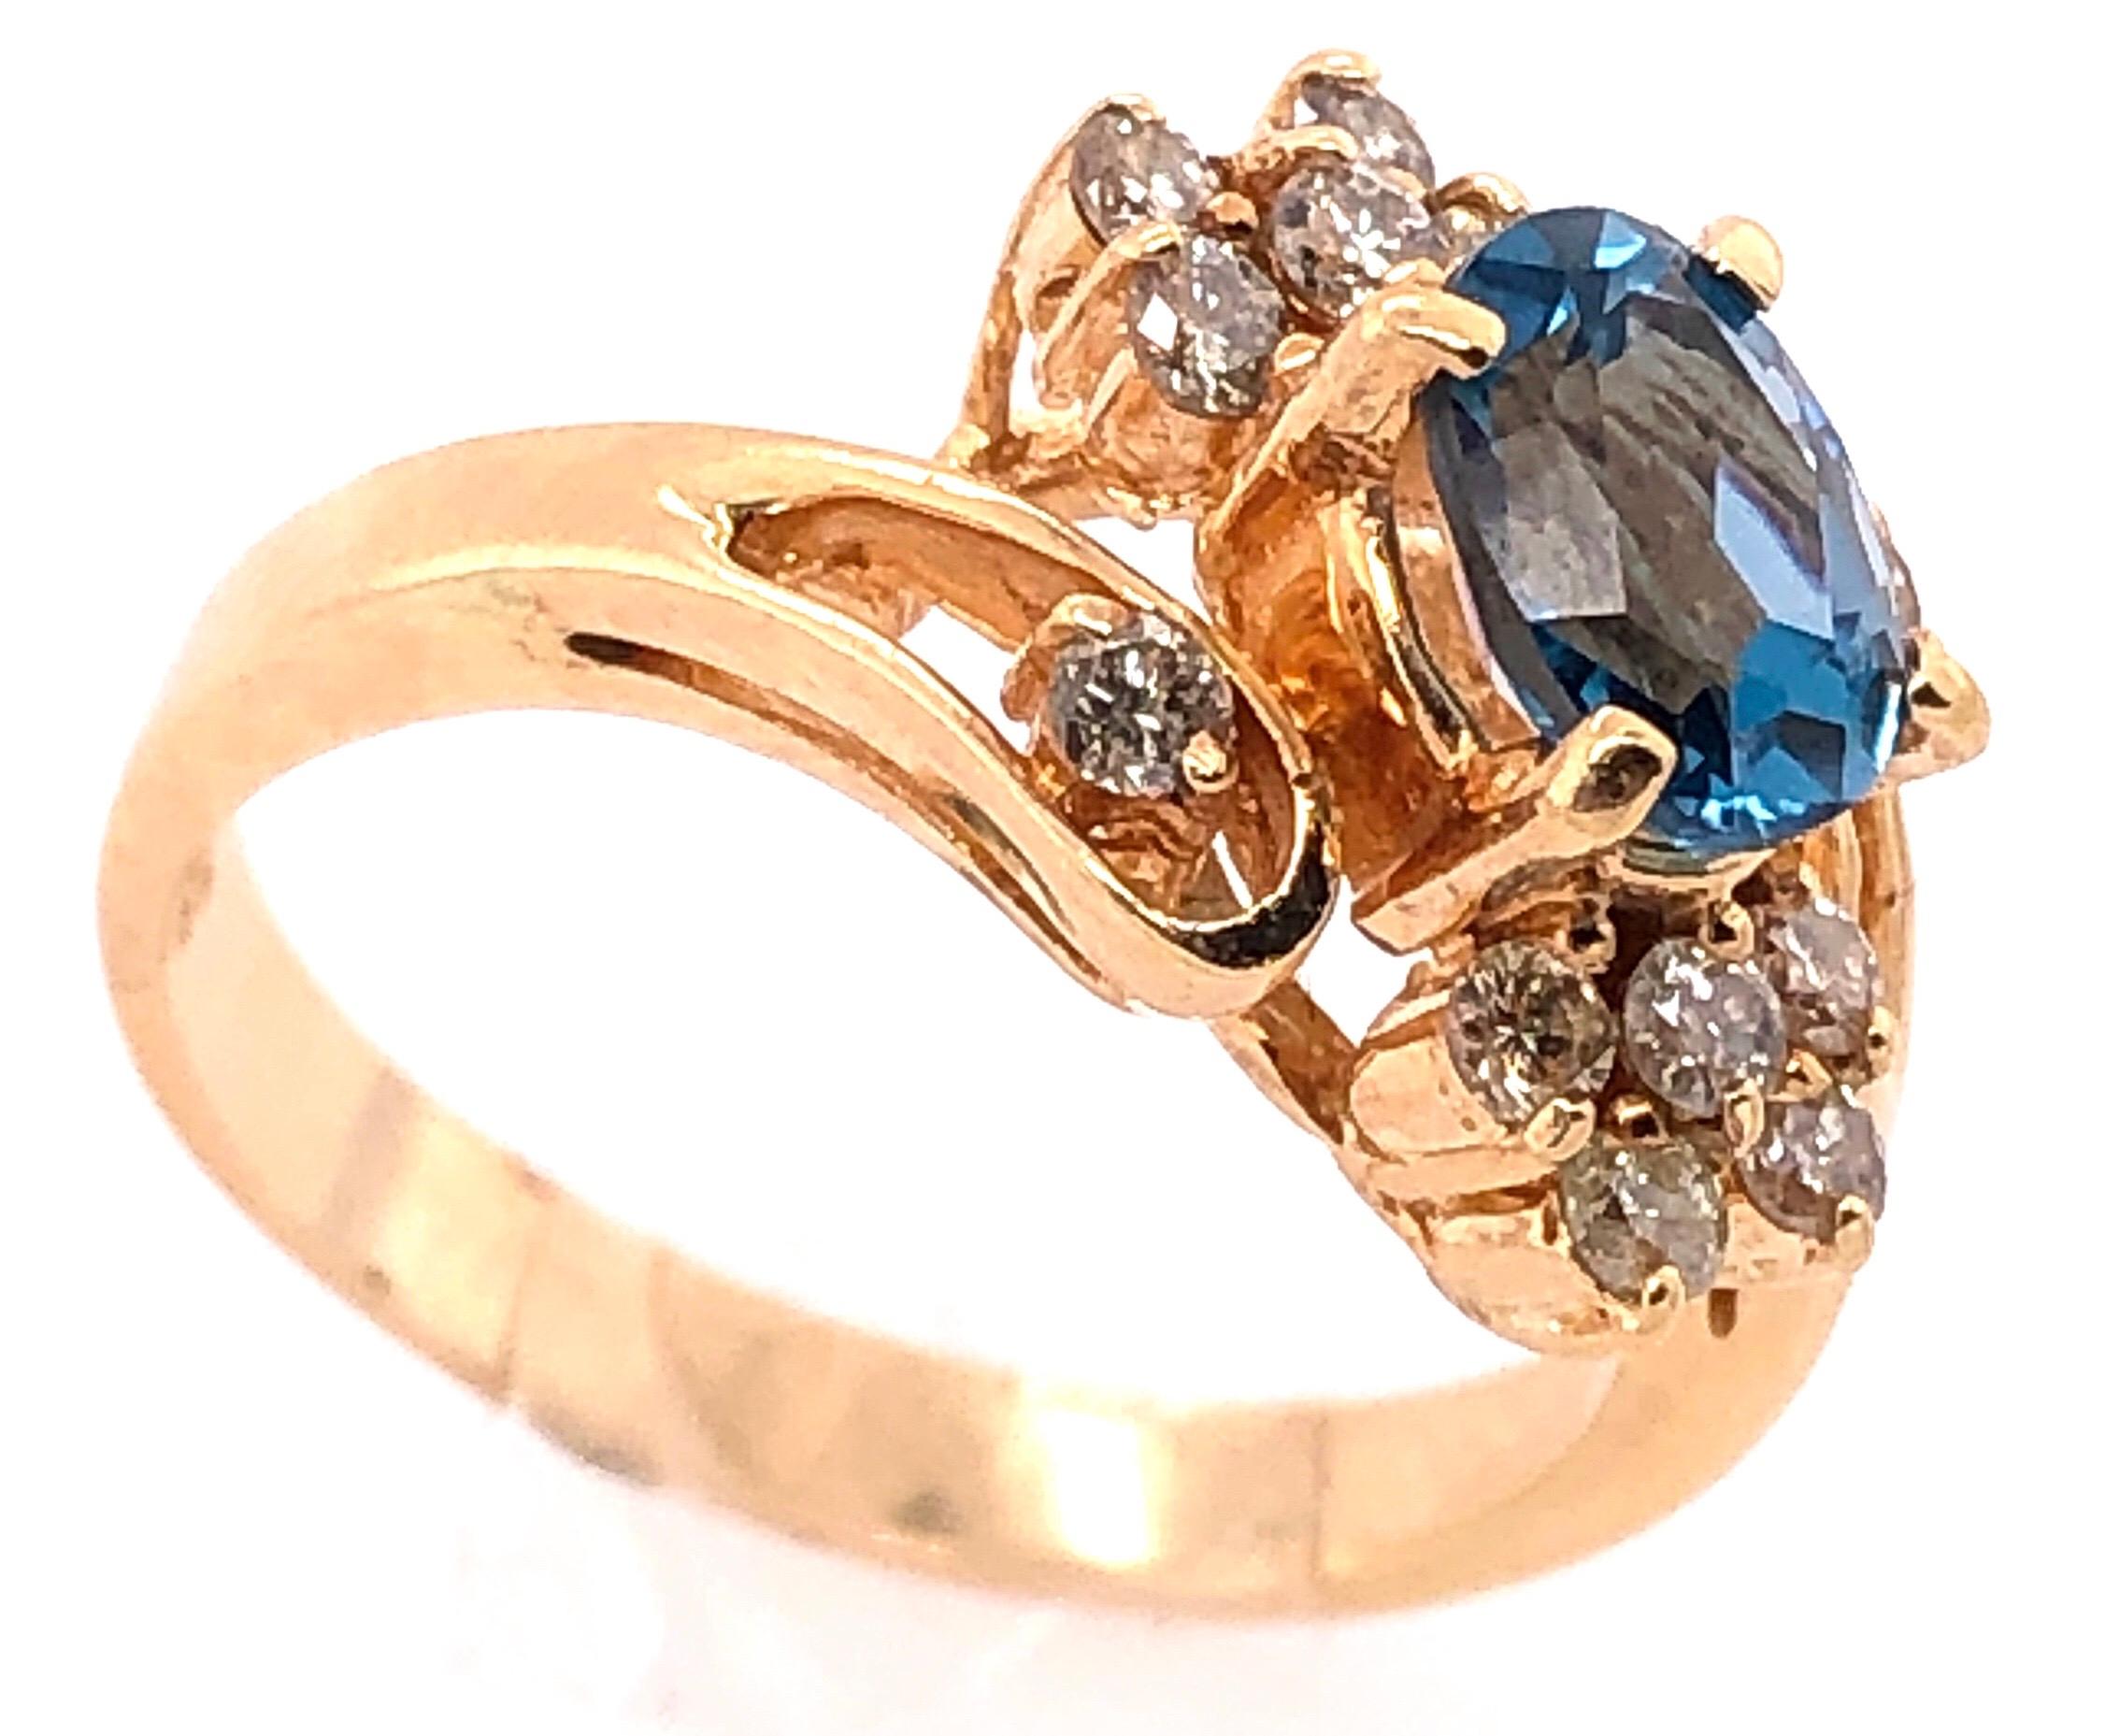 14 Karat Yellow Gold Blue Emerald Ring with Diamond Accents 
50.00 TDW.
Size 6.5
4.22 grams total weight.